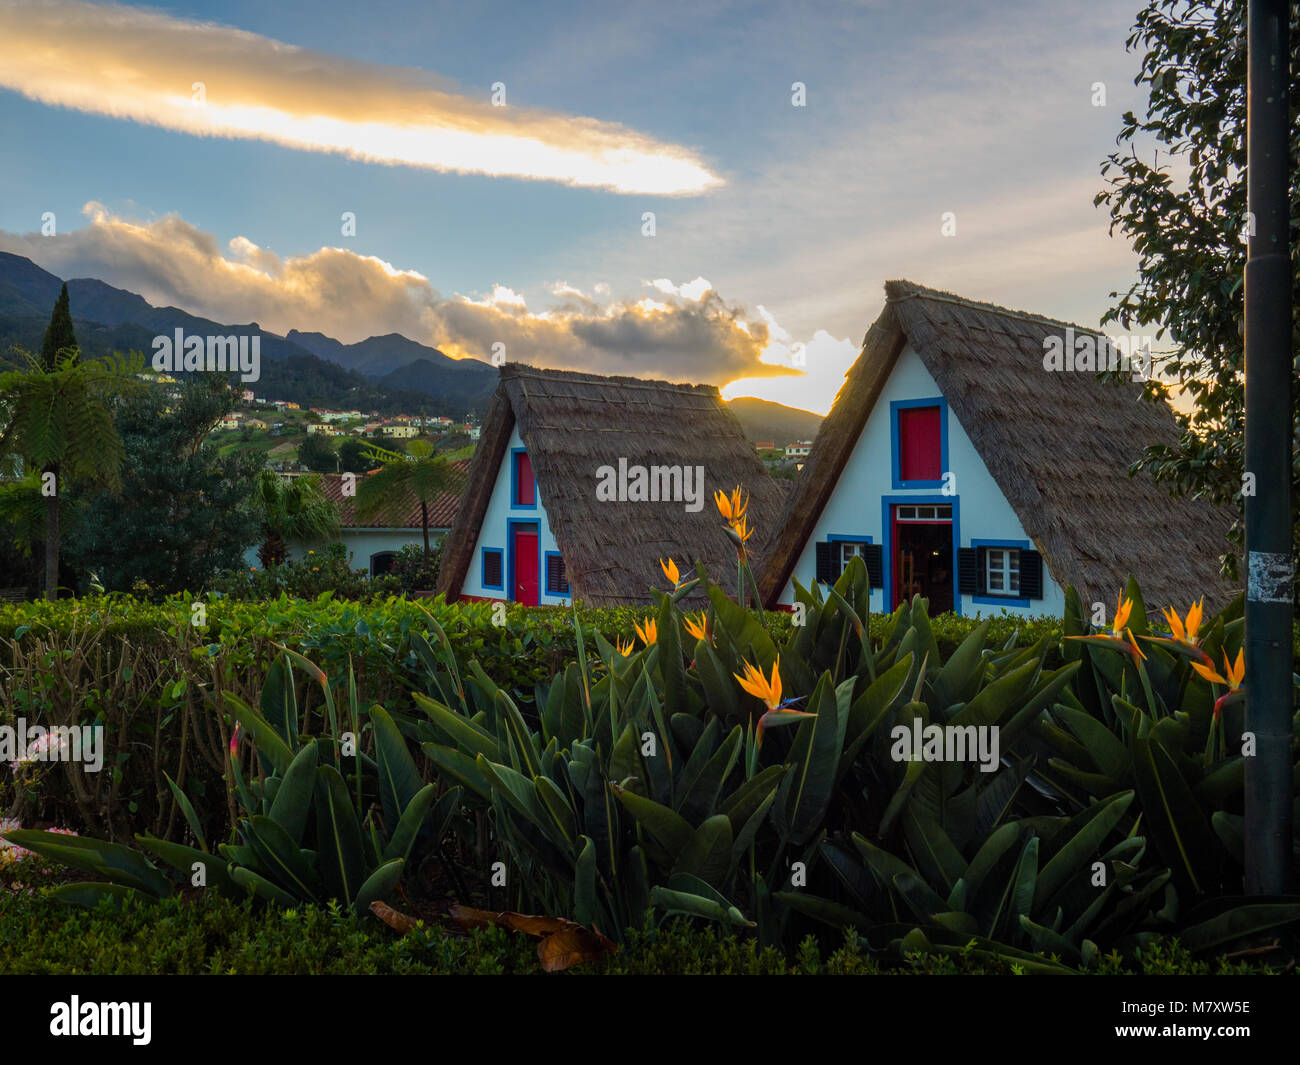 Typical madeiran traditional houses in Santana, Madeira Stock Photo